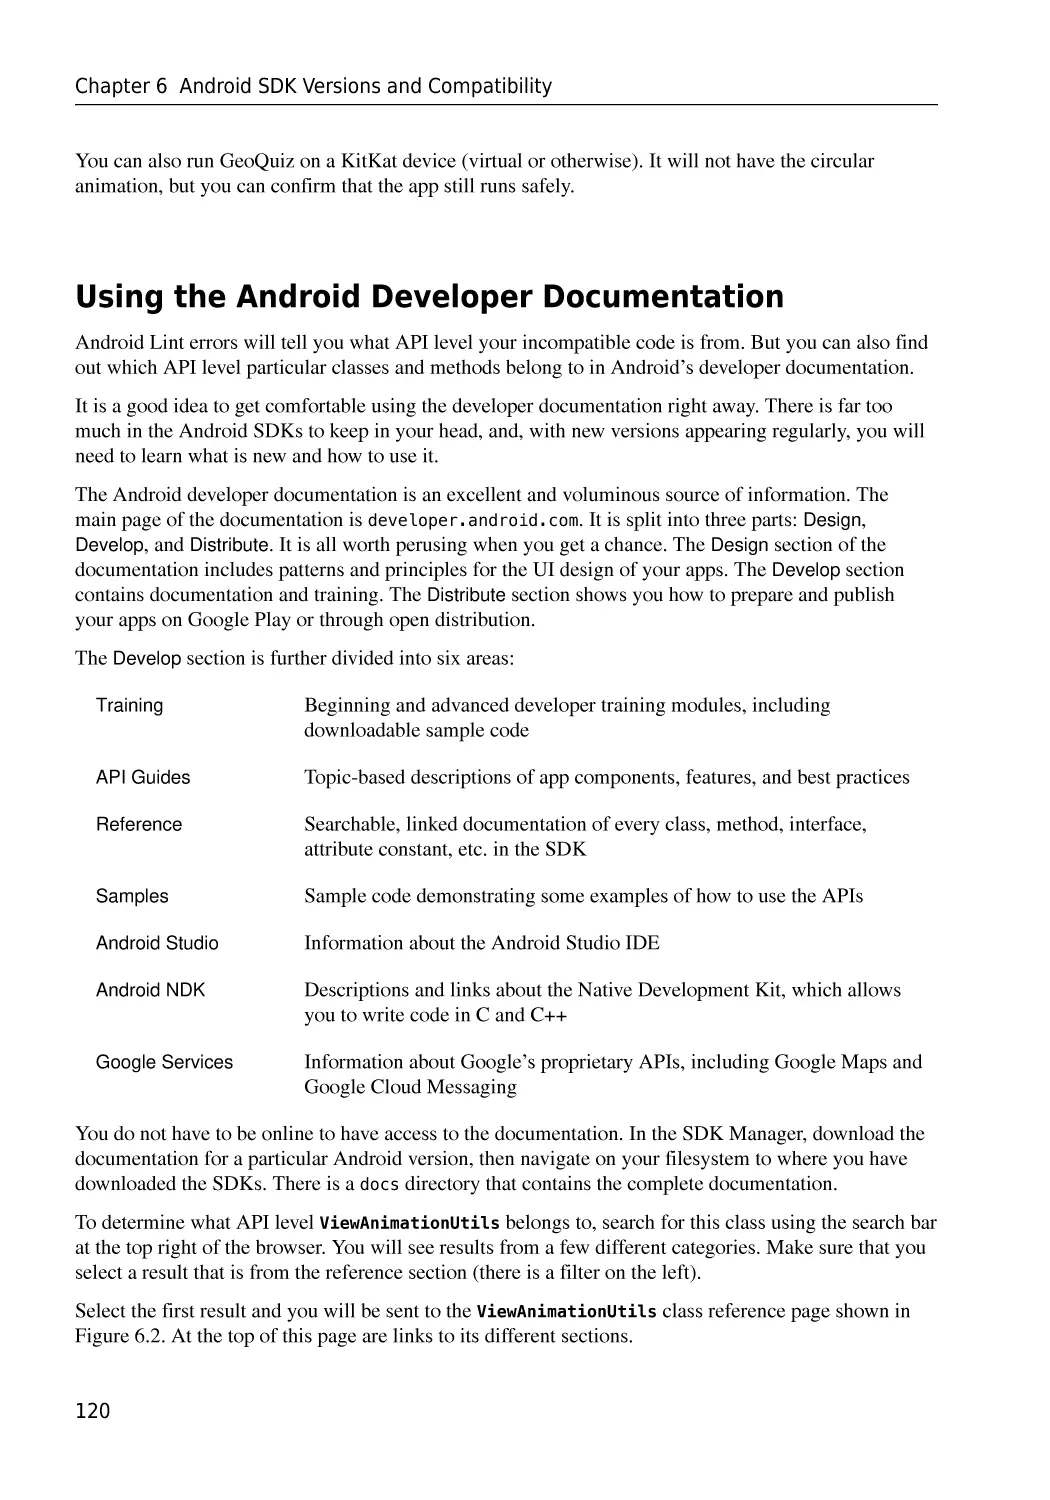 Using the Android Developer Documentation